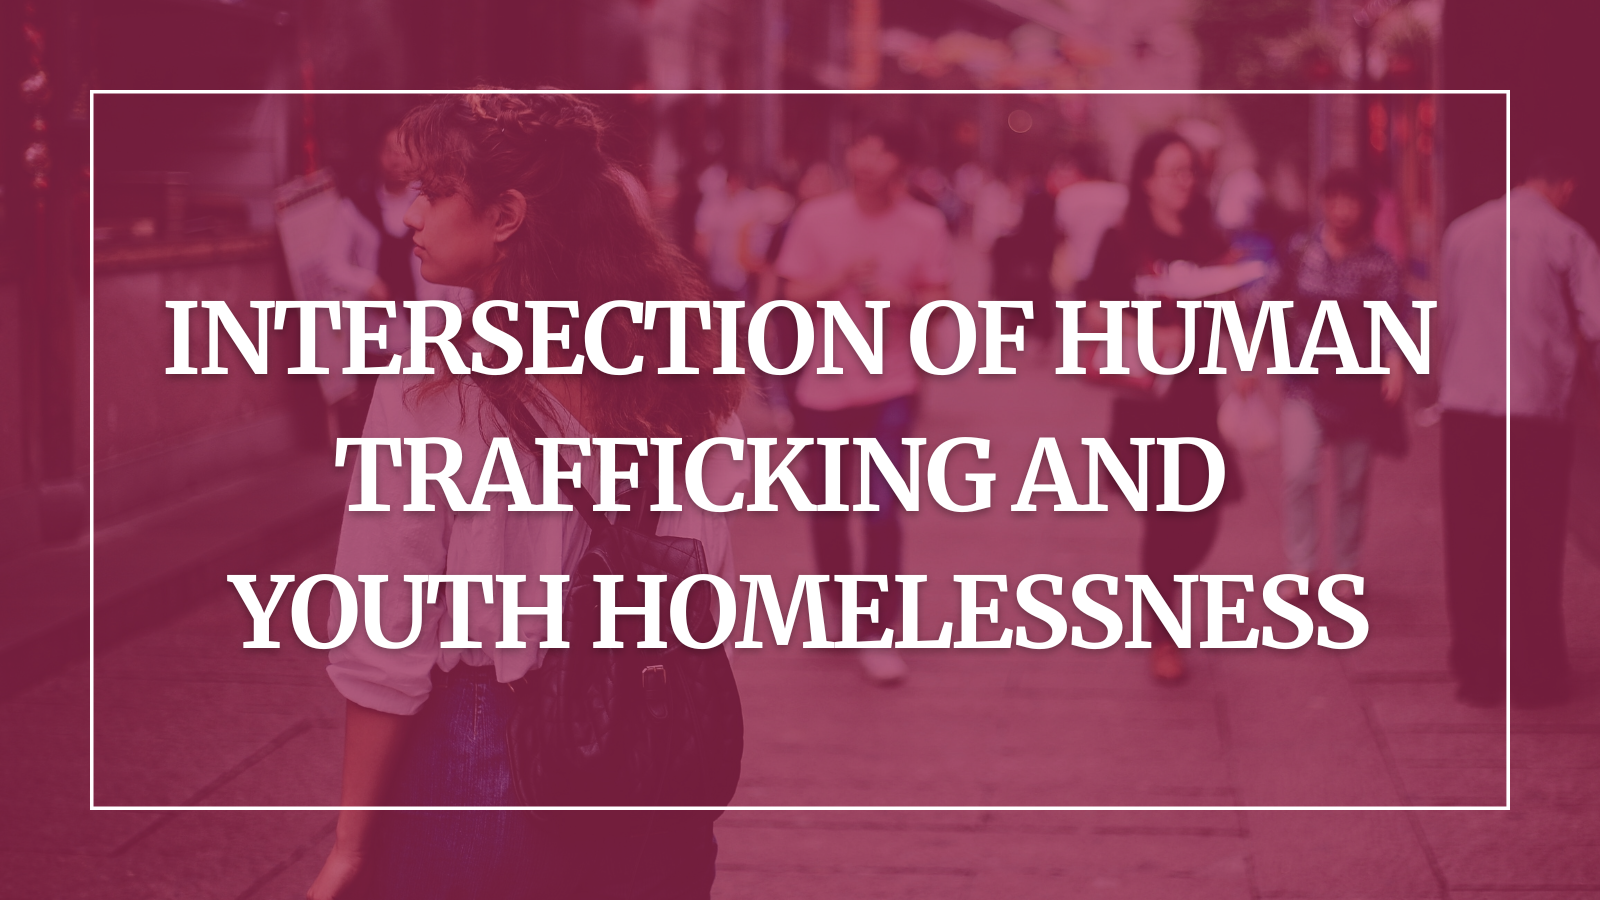 image of a young person walking down a crowded street, overlay is maroon with white text reading "INTERSECTION OF HUMAN TRAFFICKING AND YOUTH HOMELESSNESS"